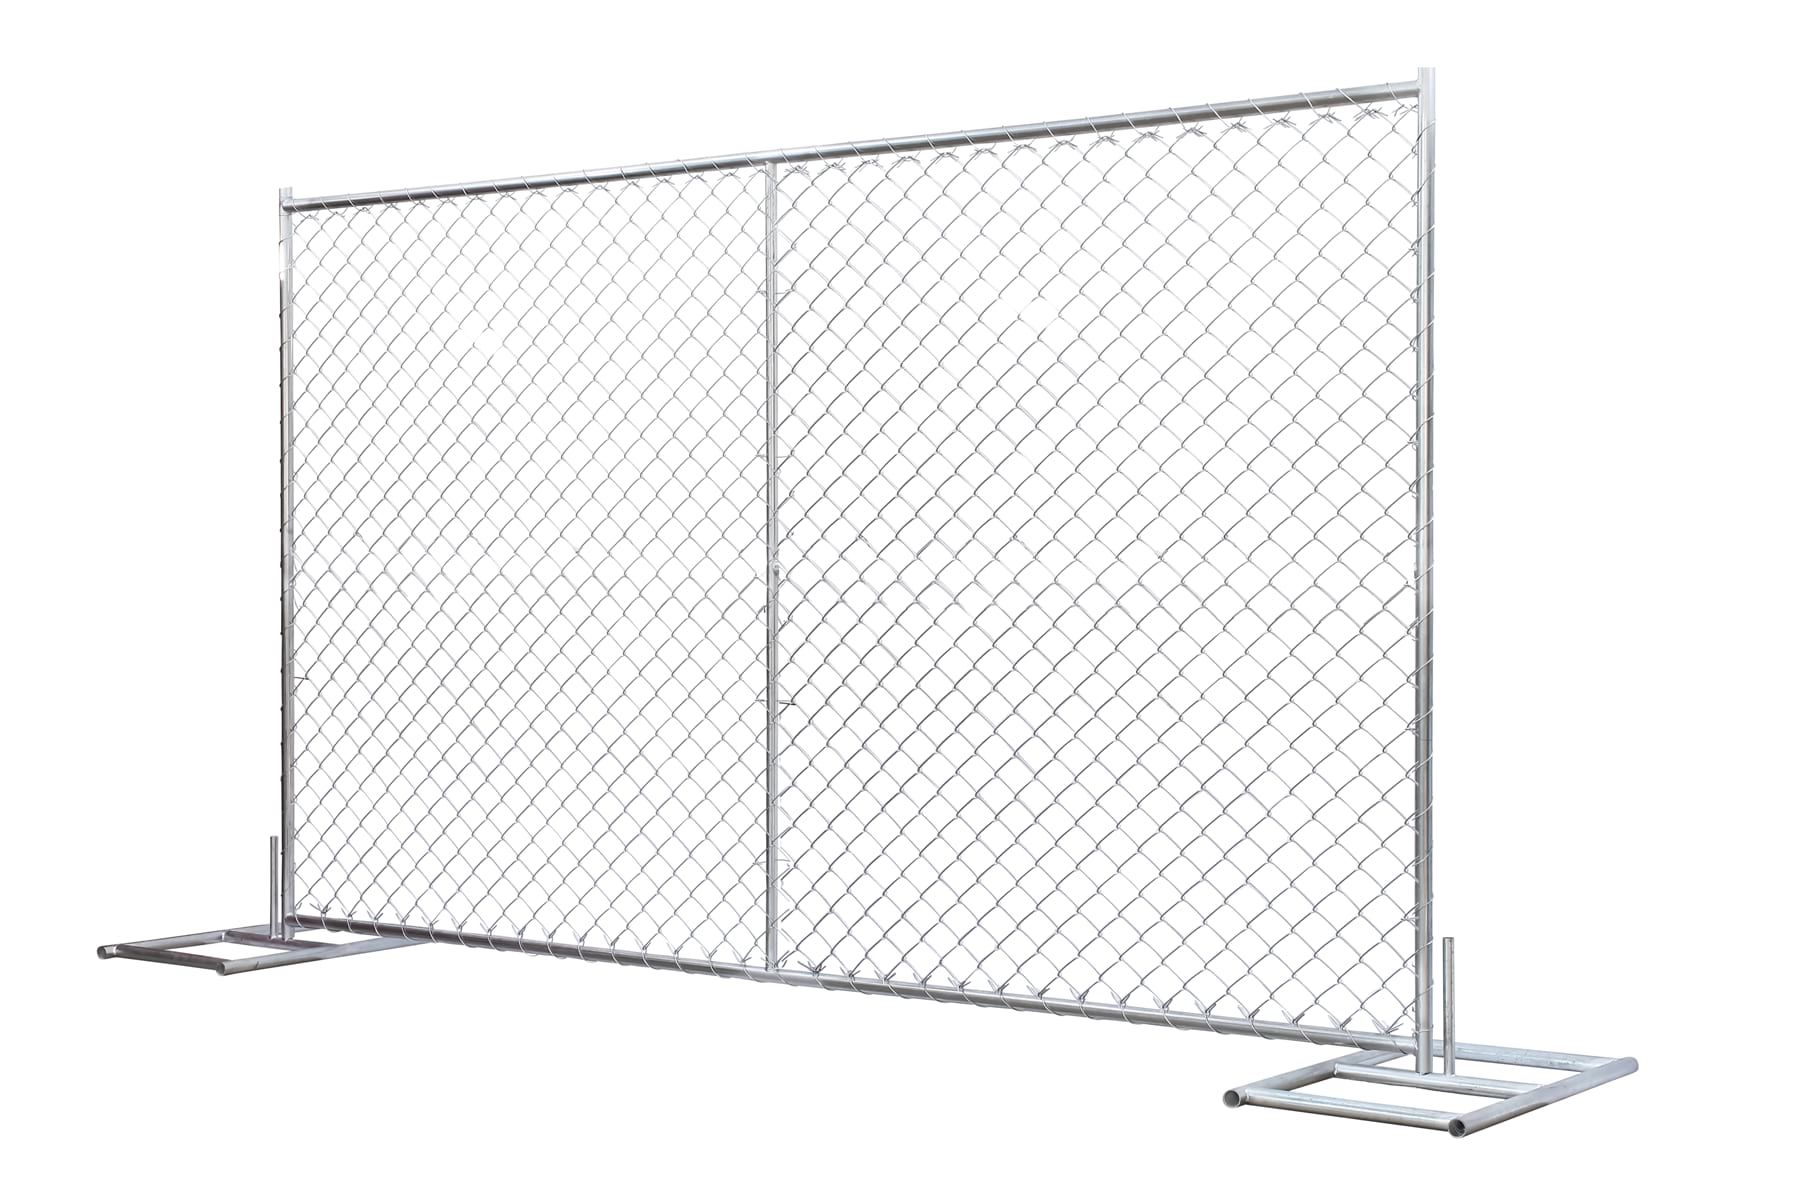 6' x 10' Inline Chain Link Fence Panel